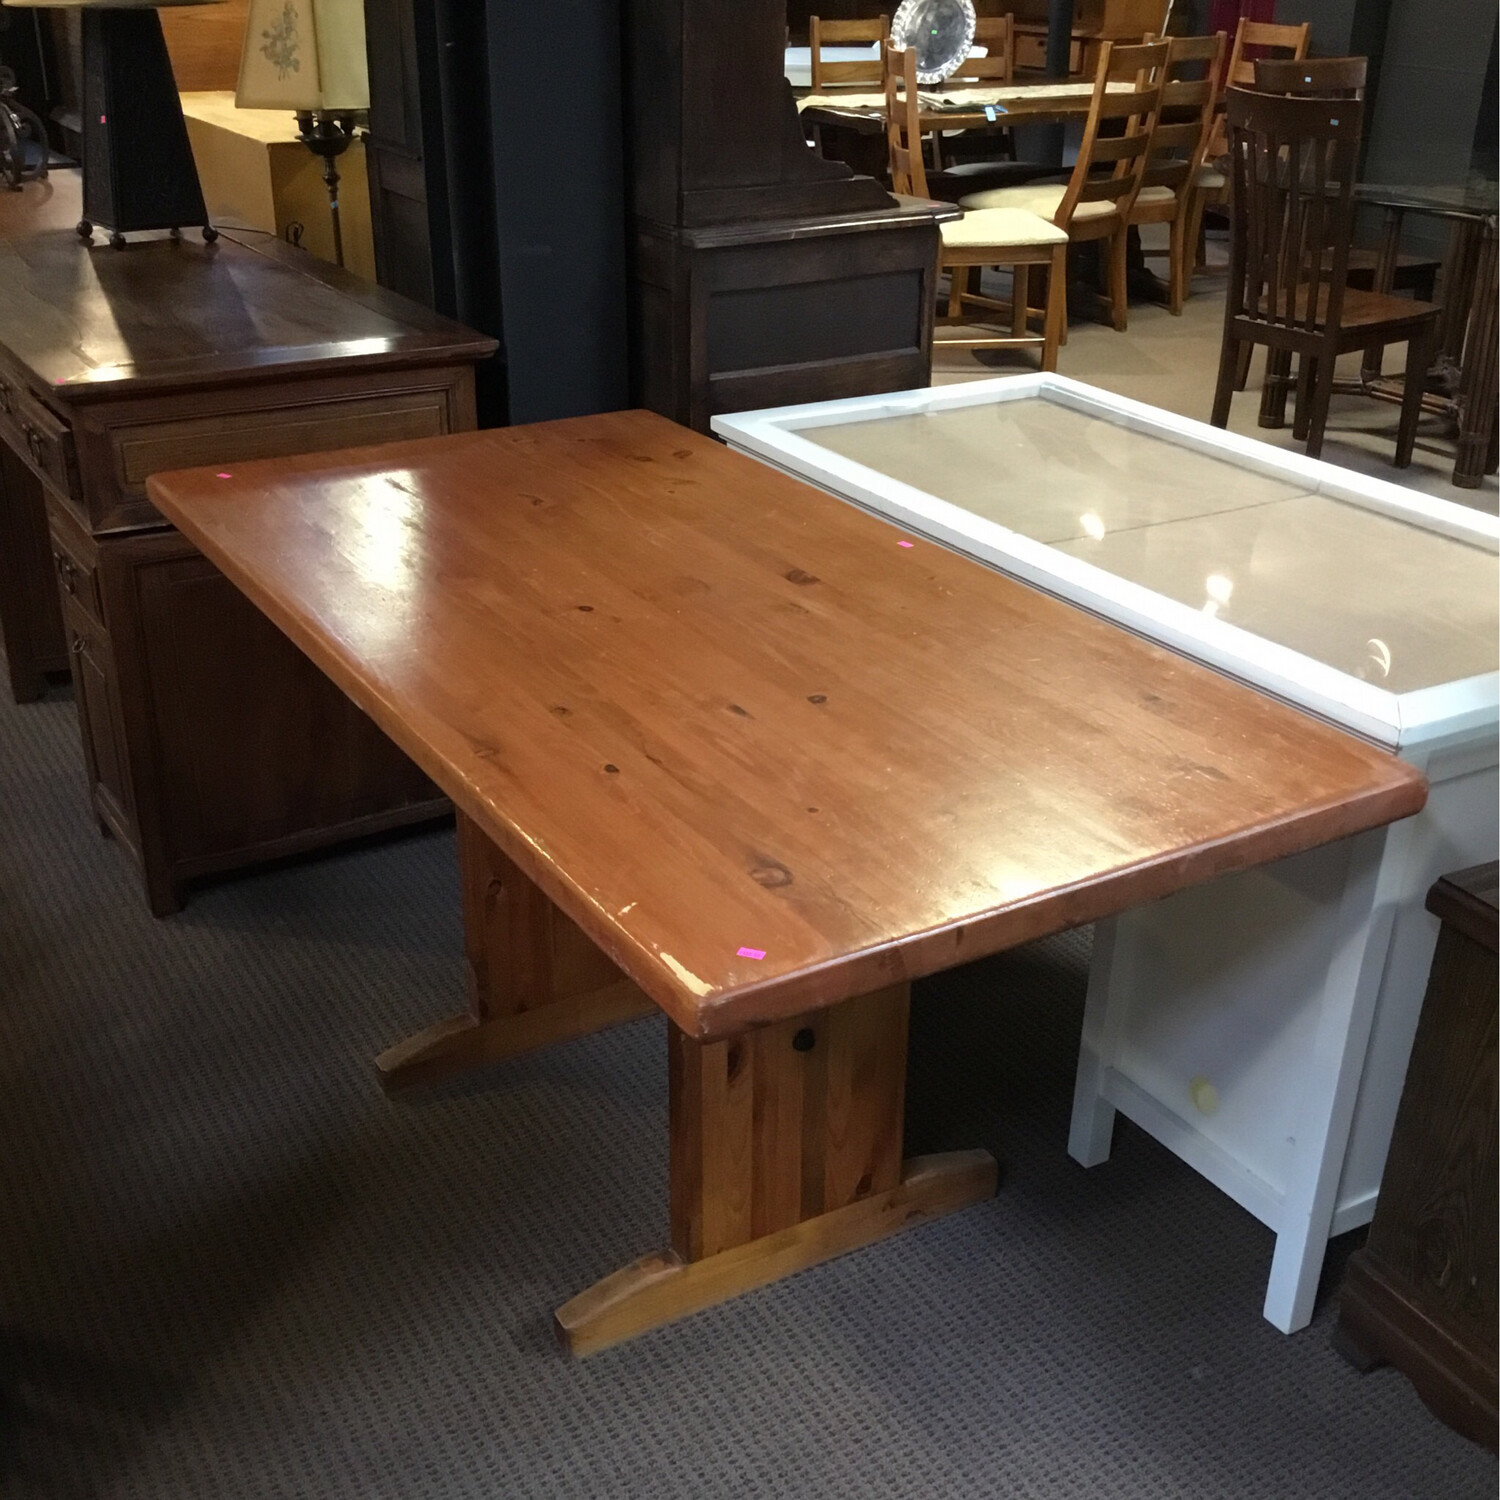 60” Wooden Dining Table